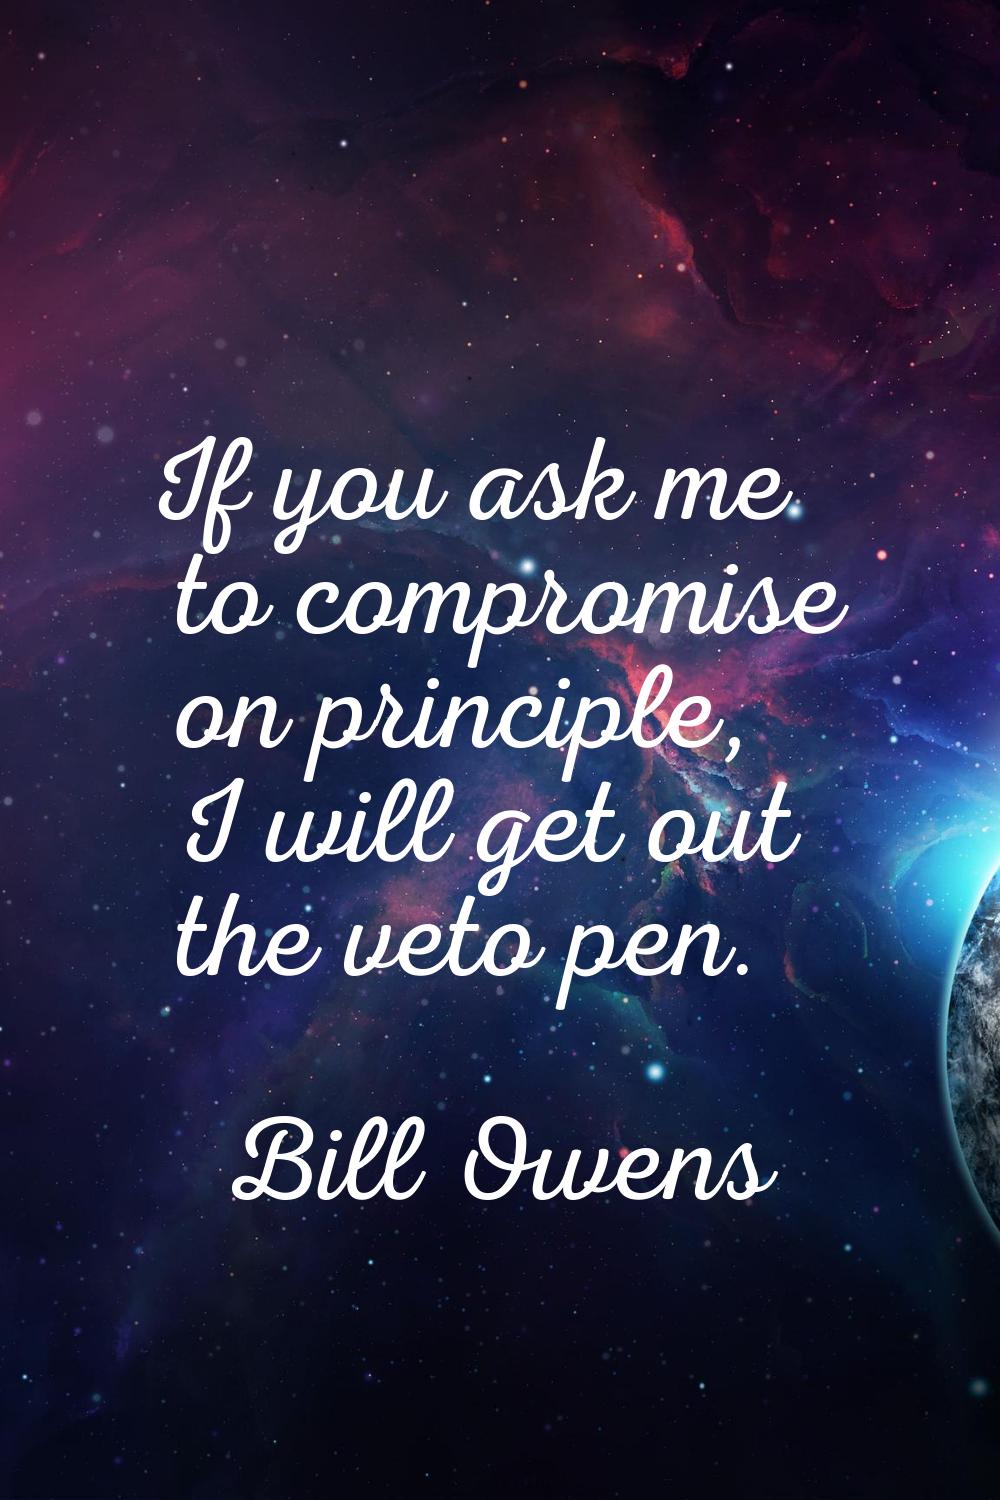 If you ask me to compromise on principle, I will get out the veto pen.